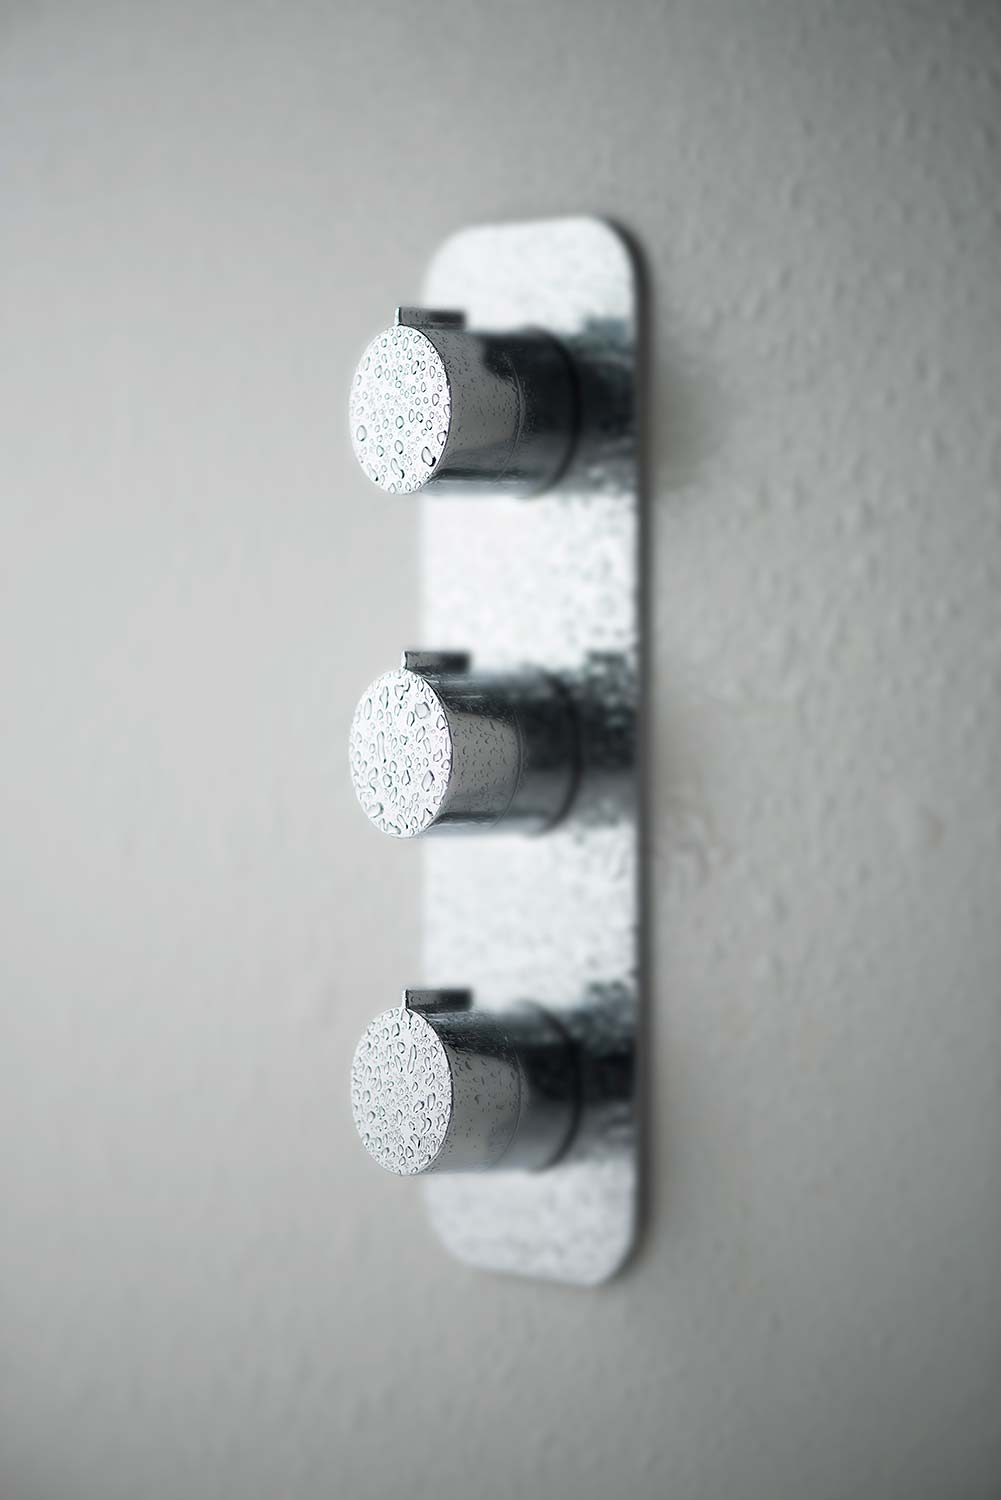 Side view of a three handle shower valve with water drops